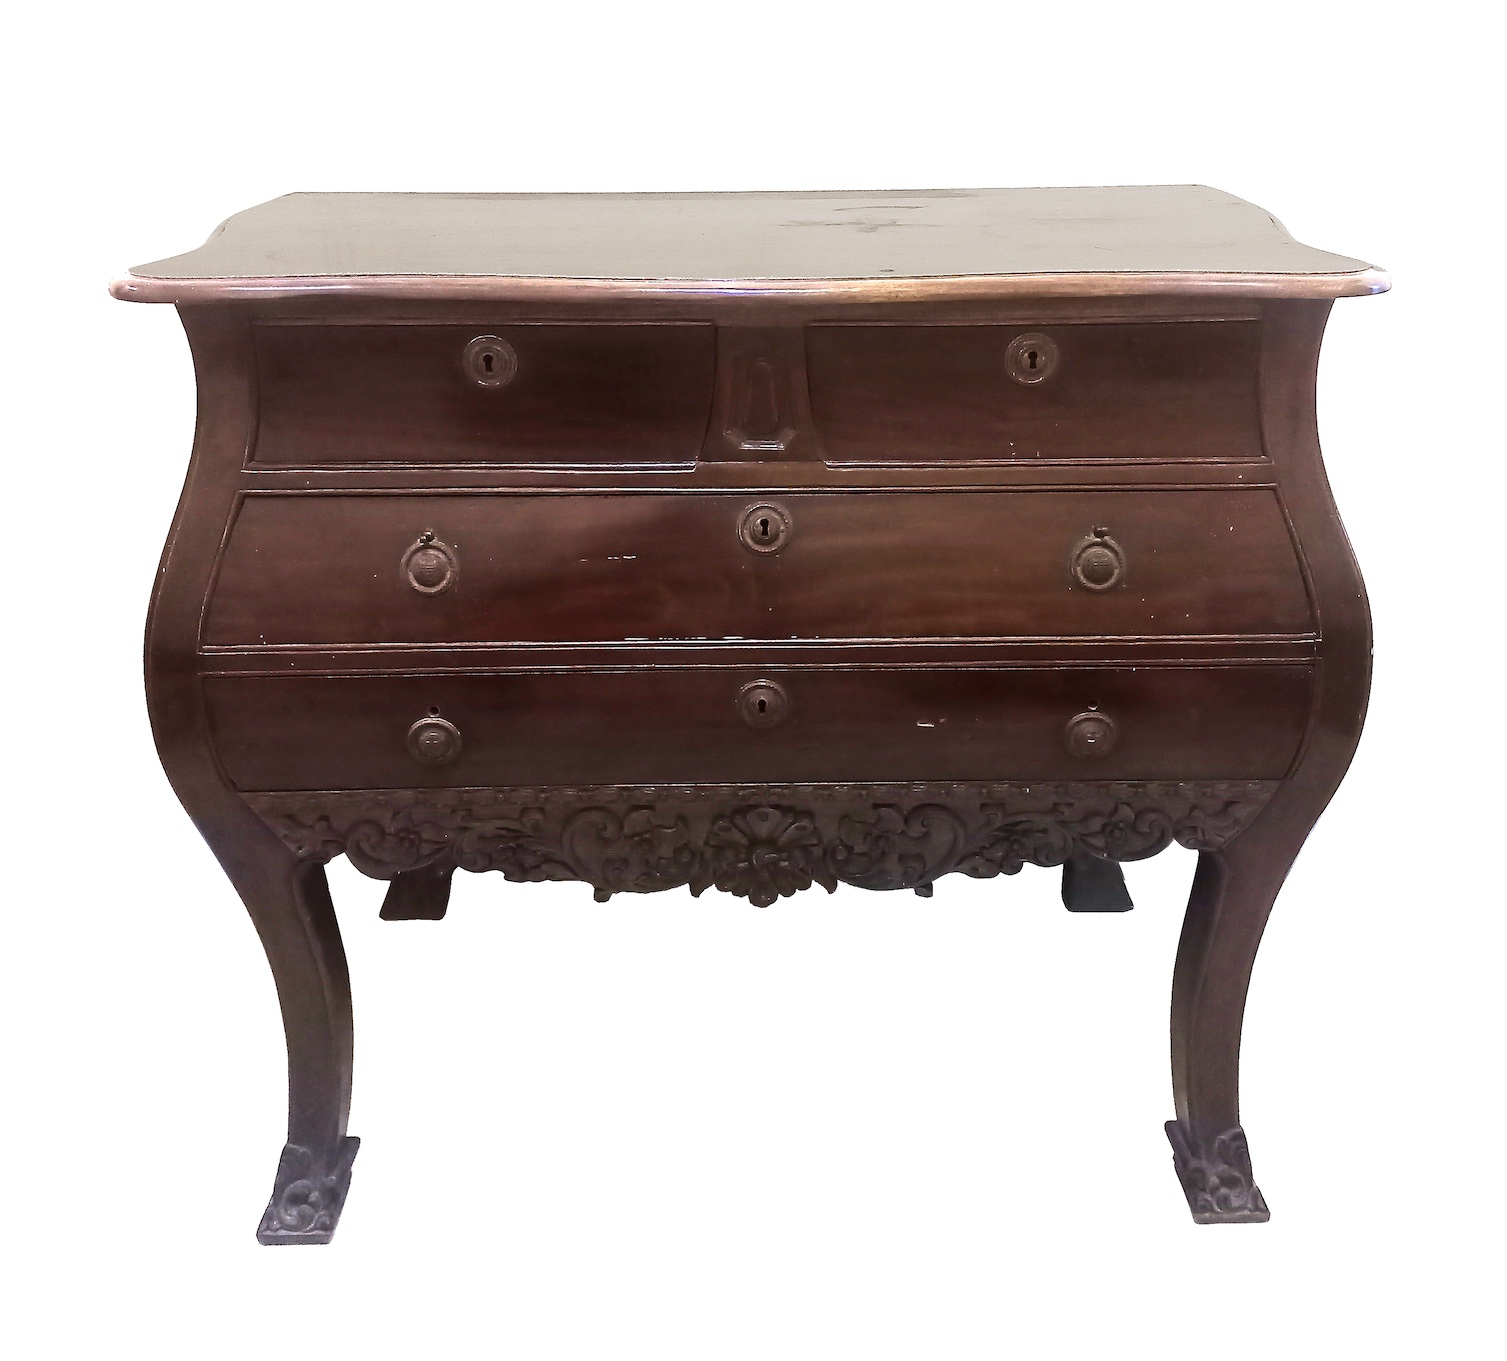 A 20th century carved teak commode with four drawers